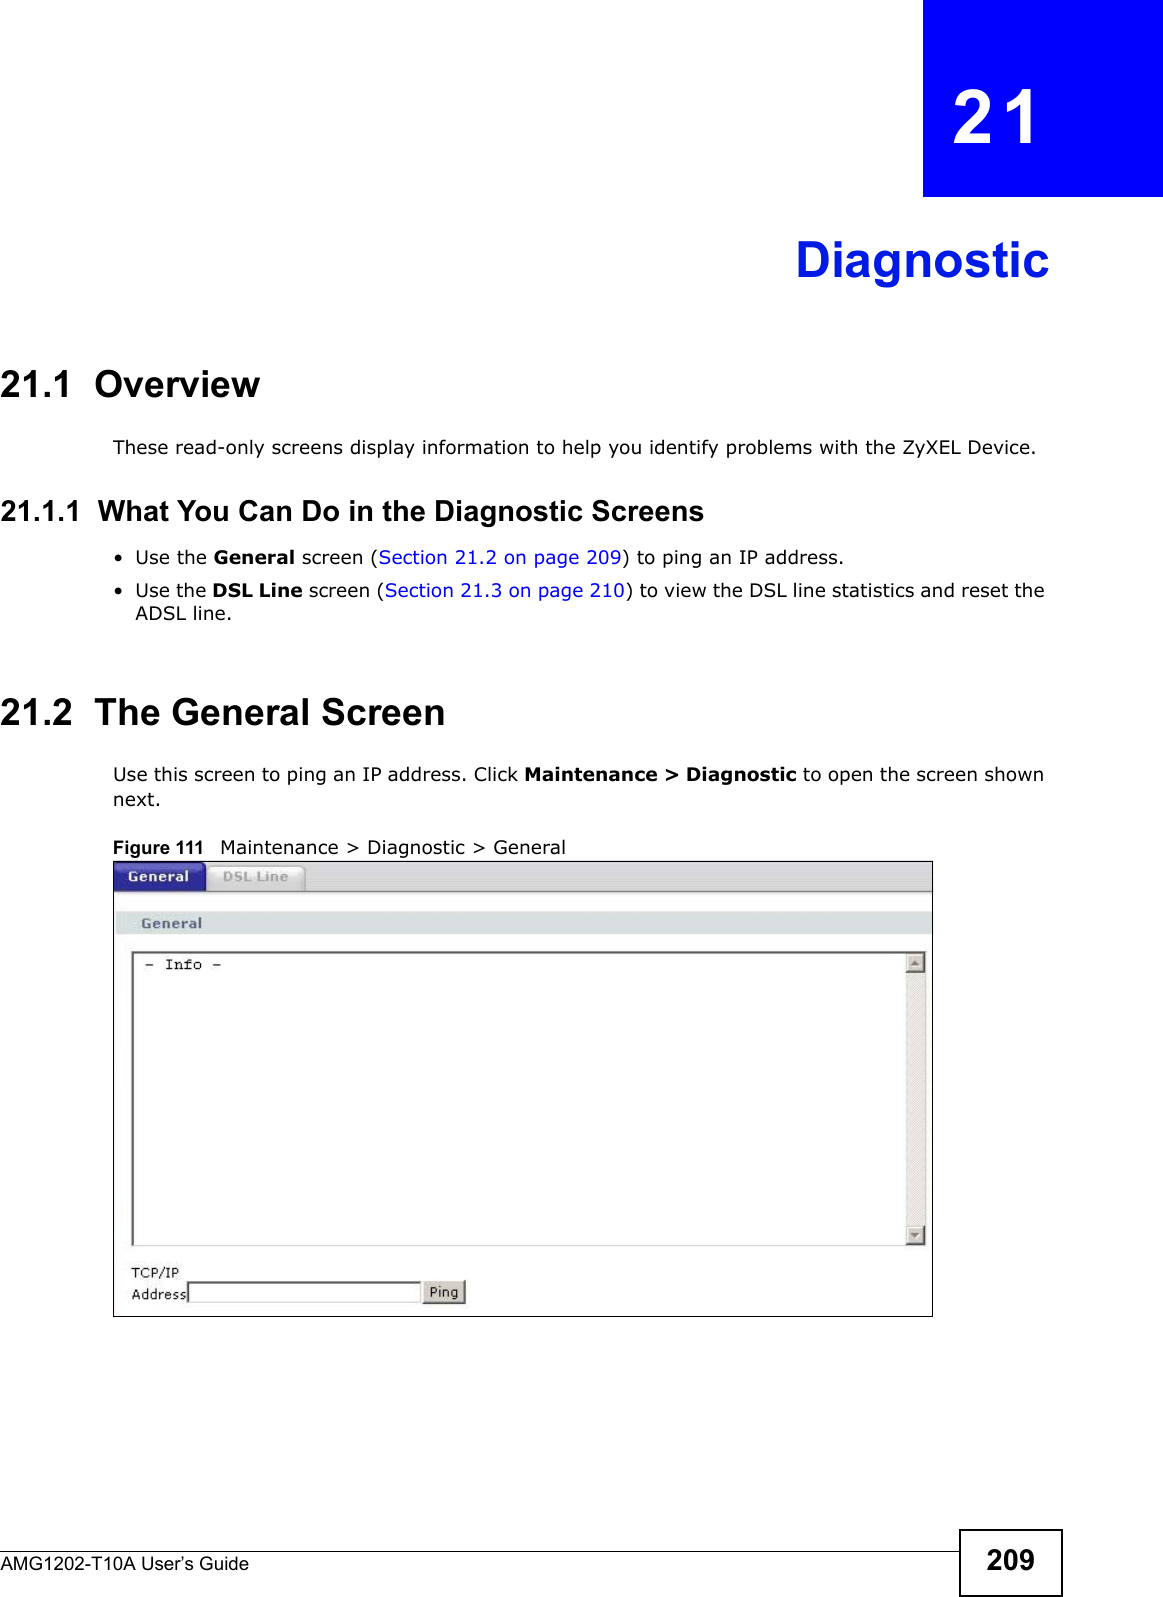 AMG1202-T10A User’s Guide 209CHAPTER   21Diagnostic21.1  OverviewThese read-only screens display information to help you identify problems with the ZyXEL Device.21.1.1  What You Can Do in the Diagnostic Screens•Use the General screen (Section 21.2 on page 209) to ping an IP address.•Use the DSL Line screen (Section 21.3 on page 210) to view the DSL line statistics and reset the ADSL line.21.2  The General Screen Use this screen to ping an IP address. Click Maintenance &gt; Diagnostic to open the screen shown next.Figure 111   Maintenance &gt; Diagnostic &gt; General